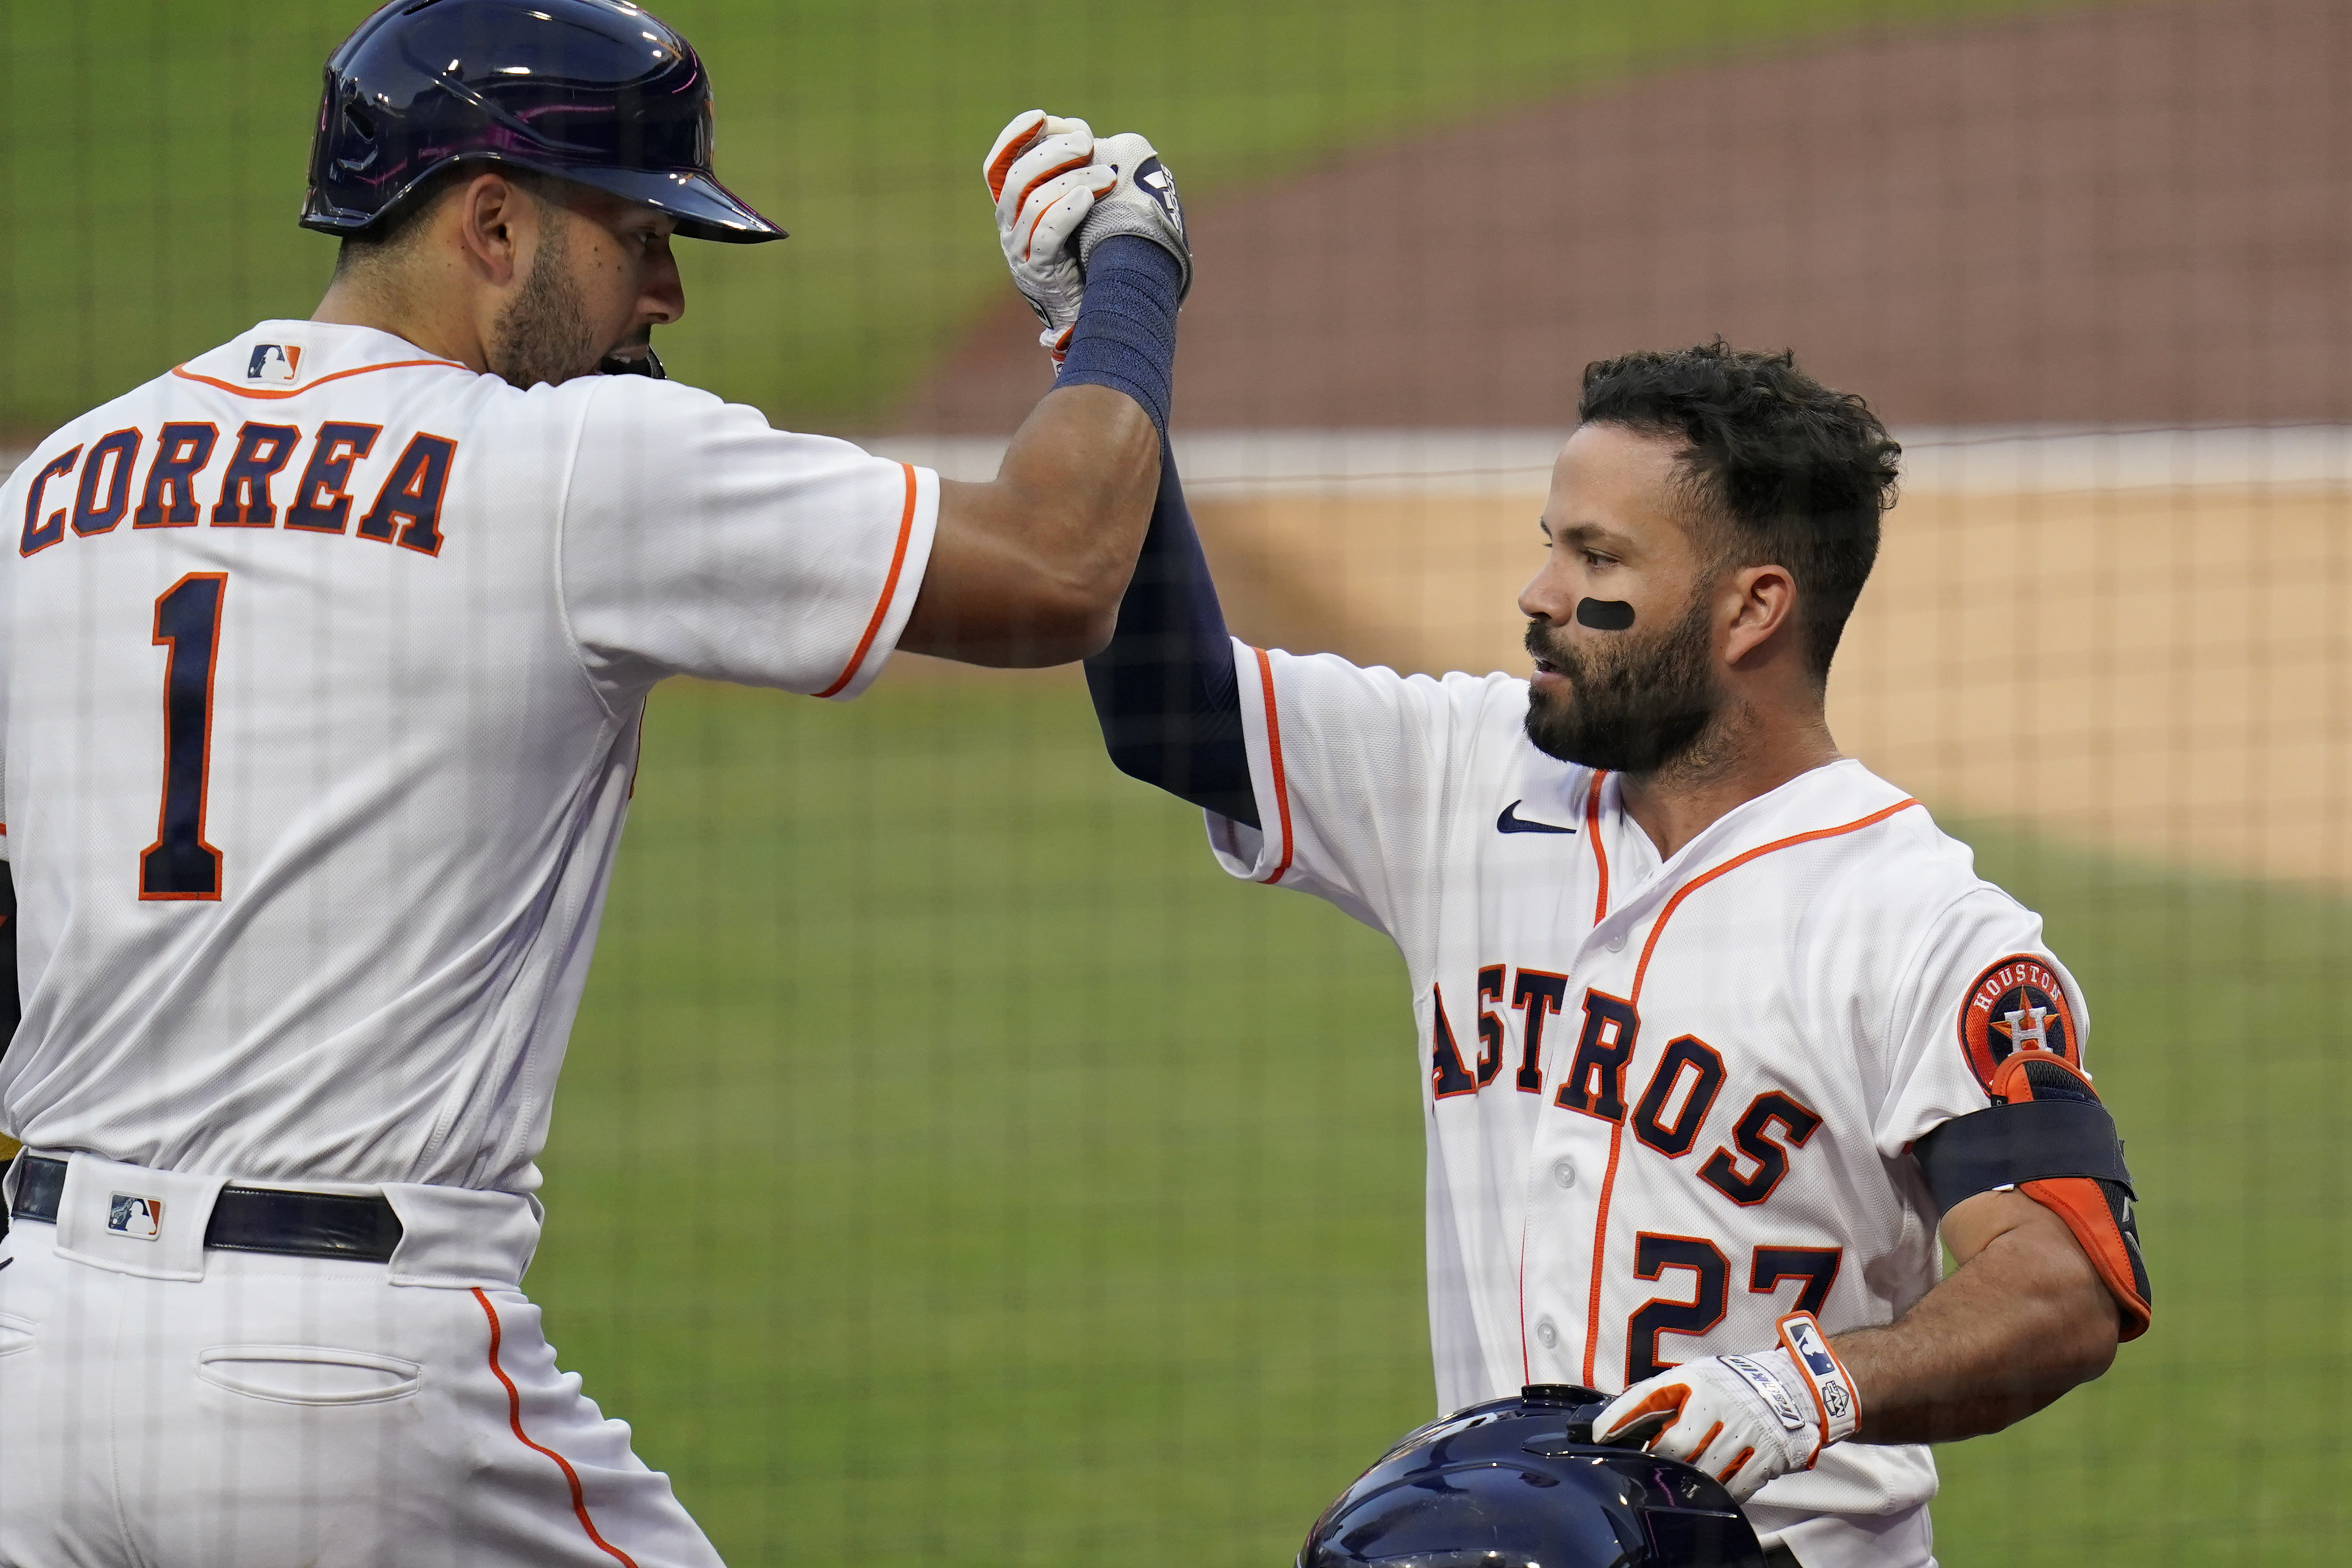 Houston Astros Jose Altuve selected to the MLB All-Star Game